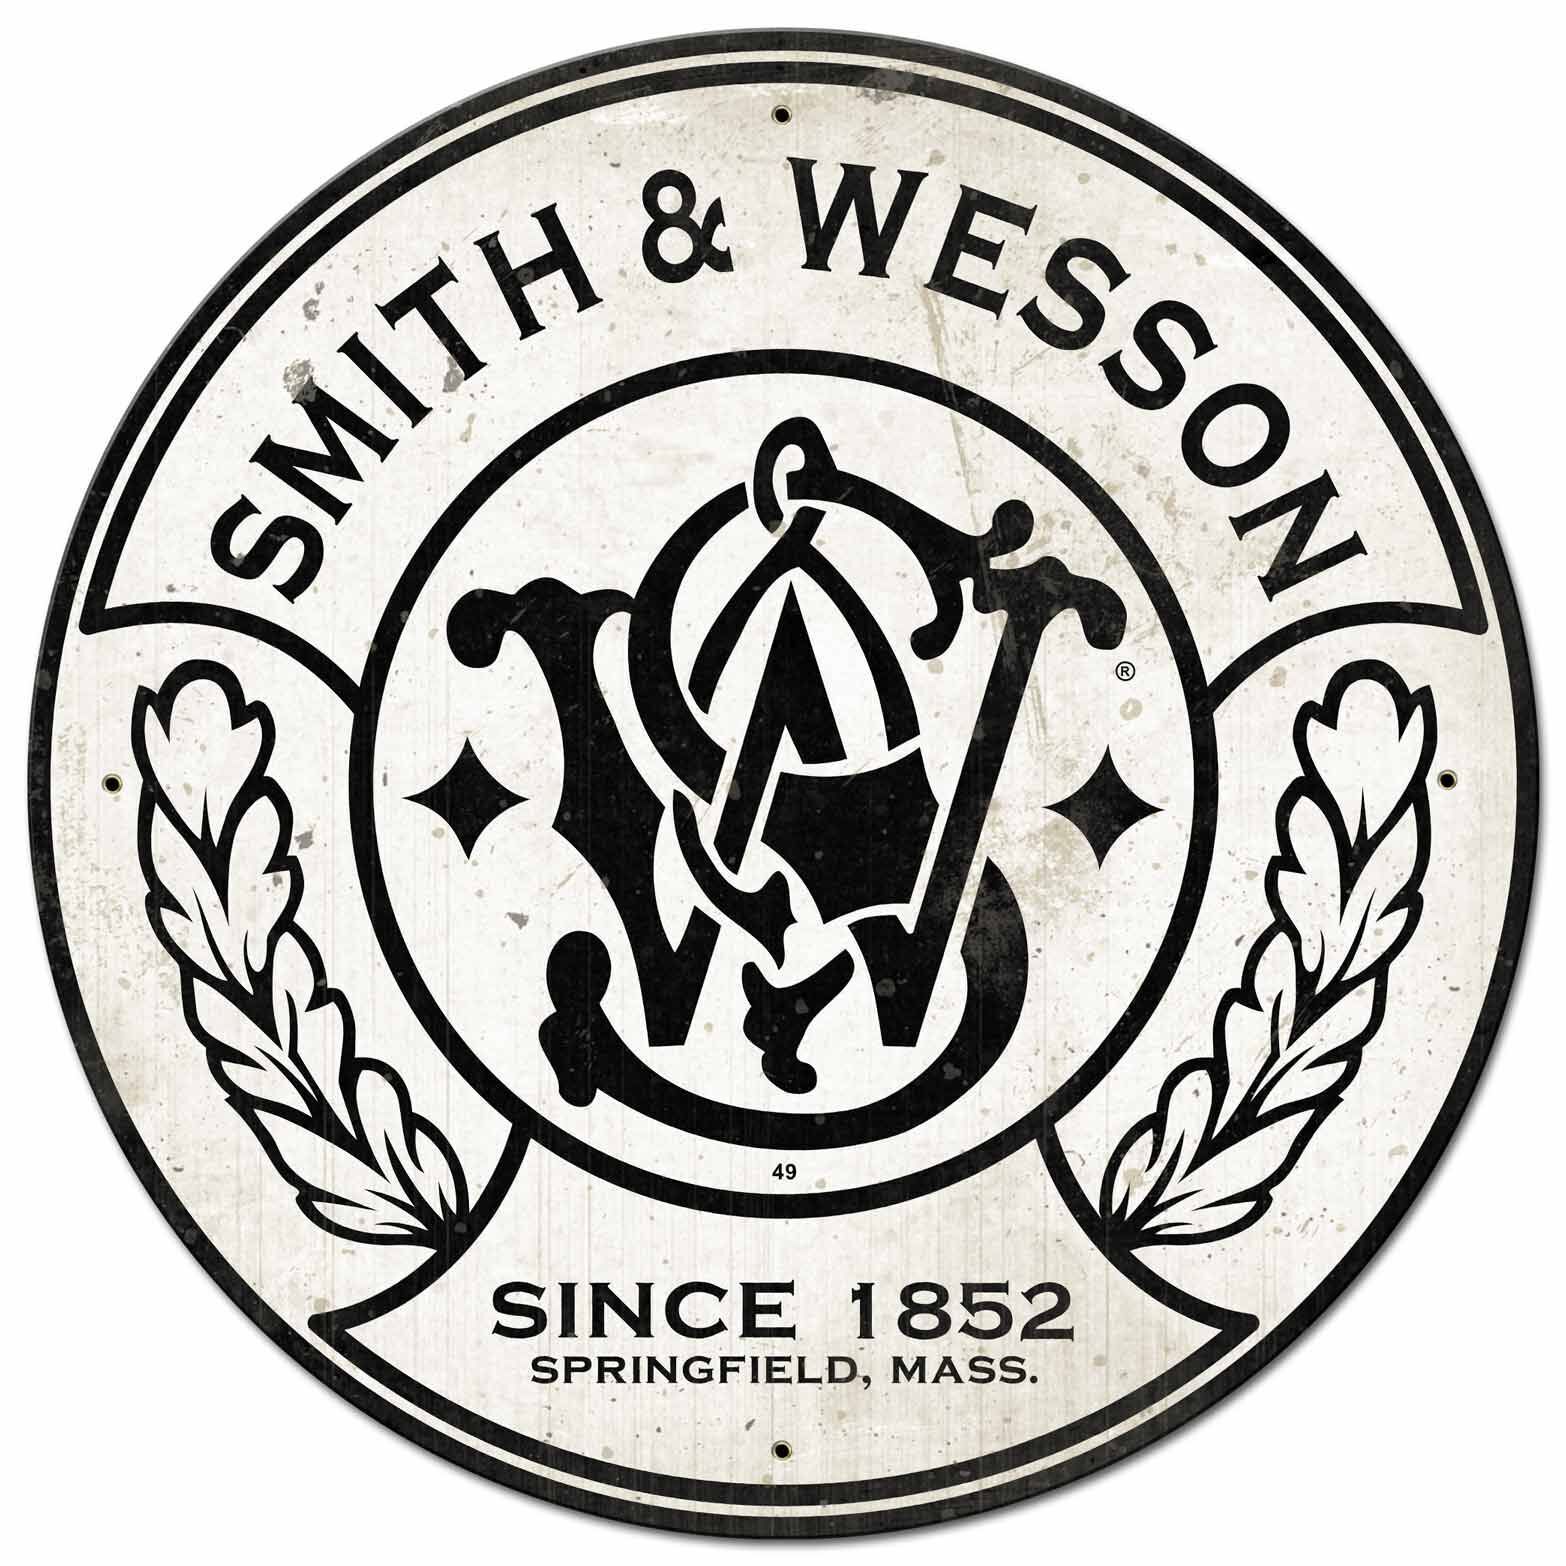 SMITH & WESSON SINCE 1852 SPRINGFIELD MA 28\